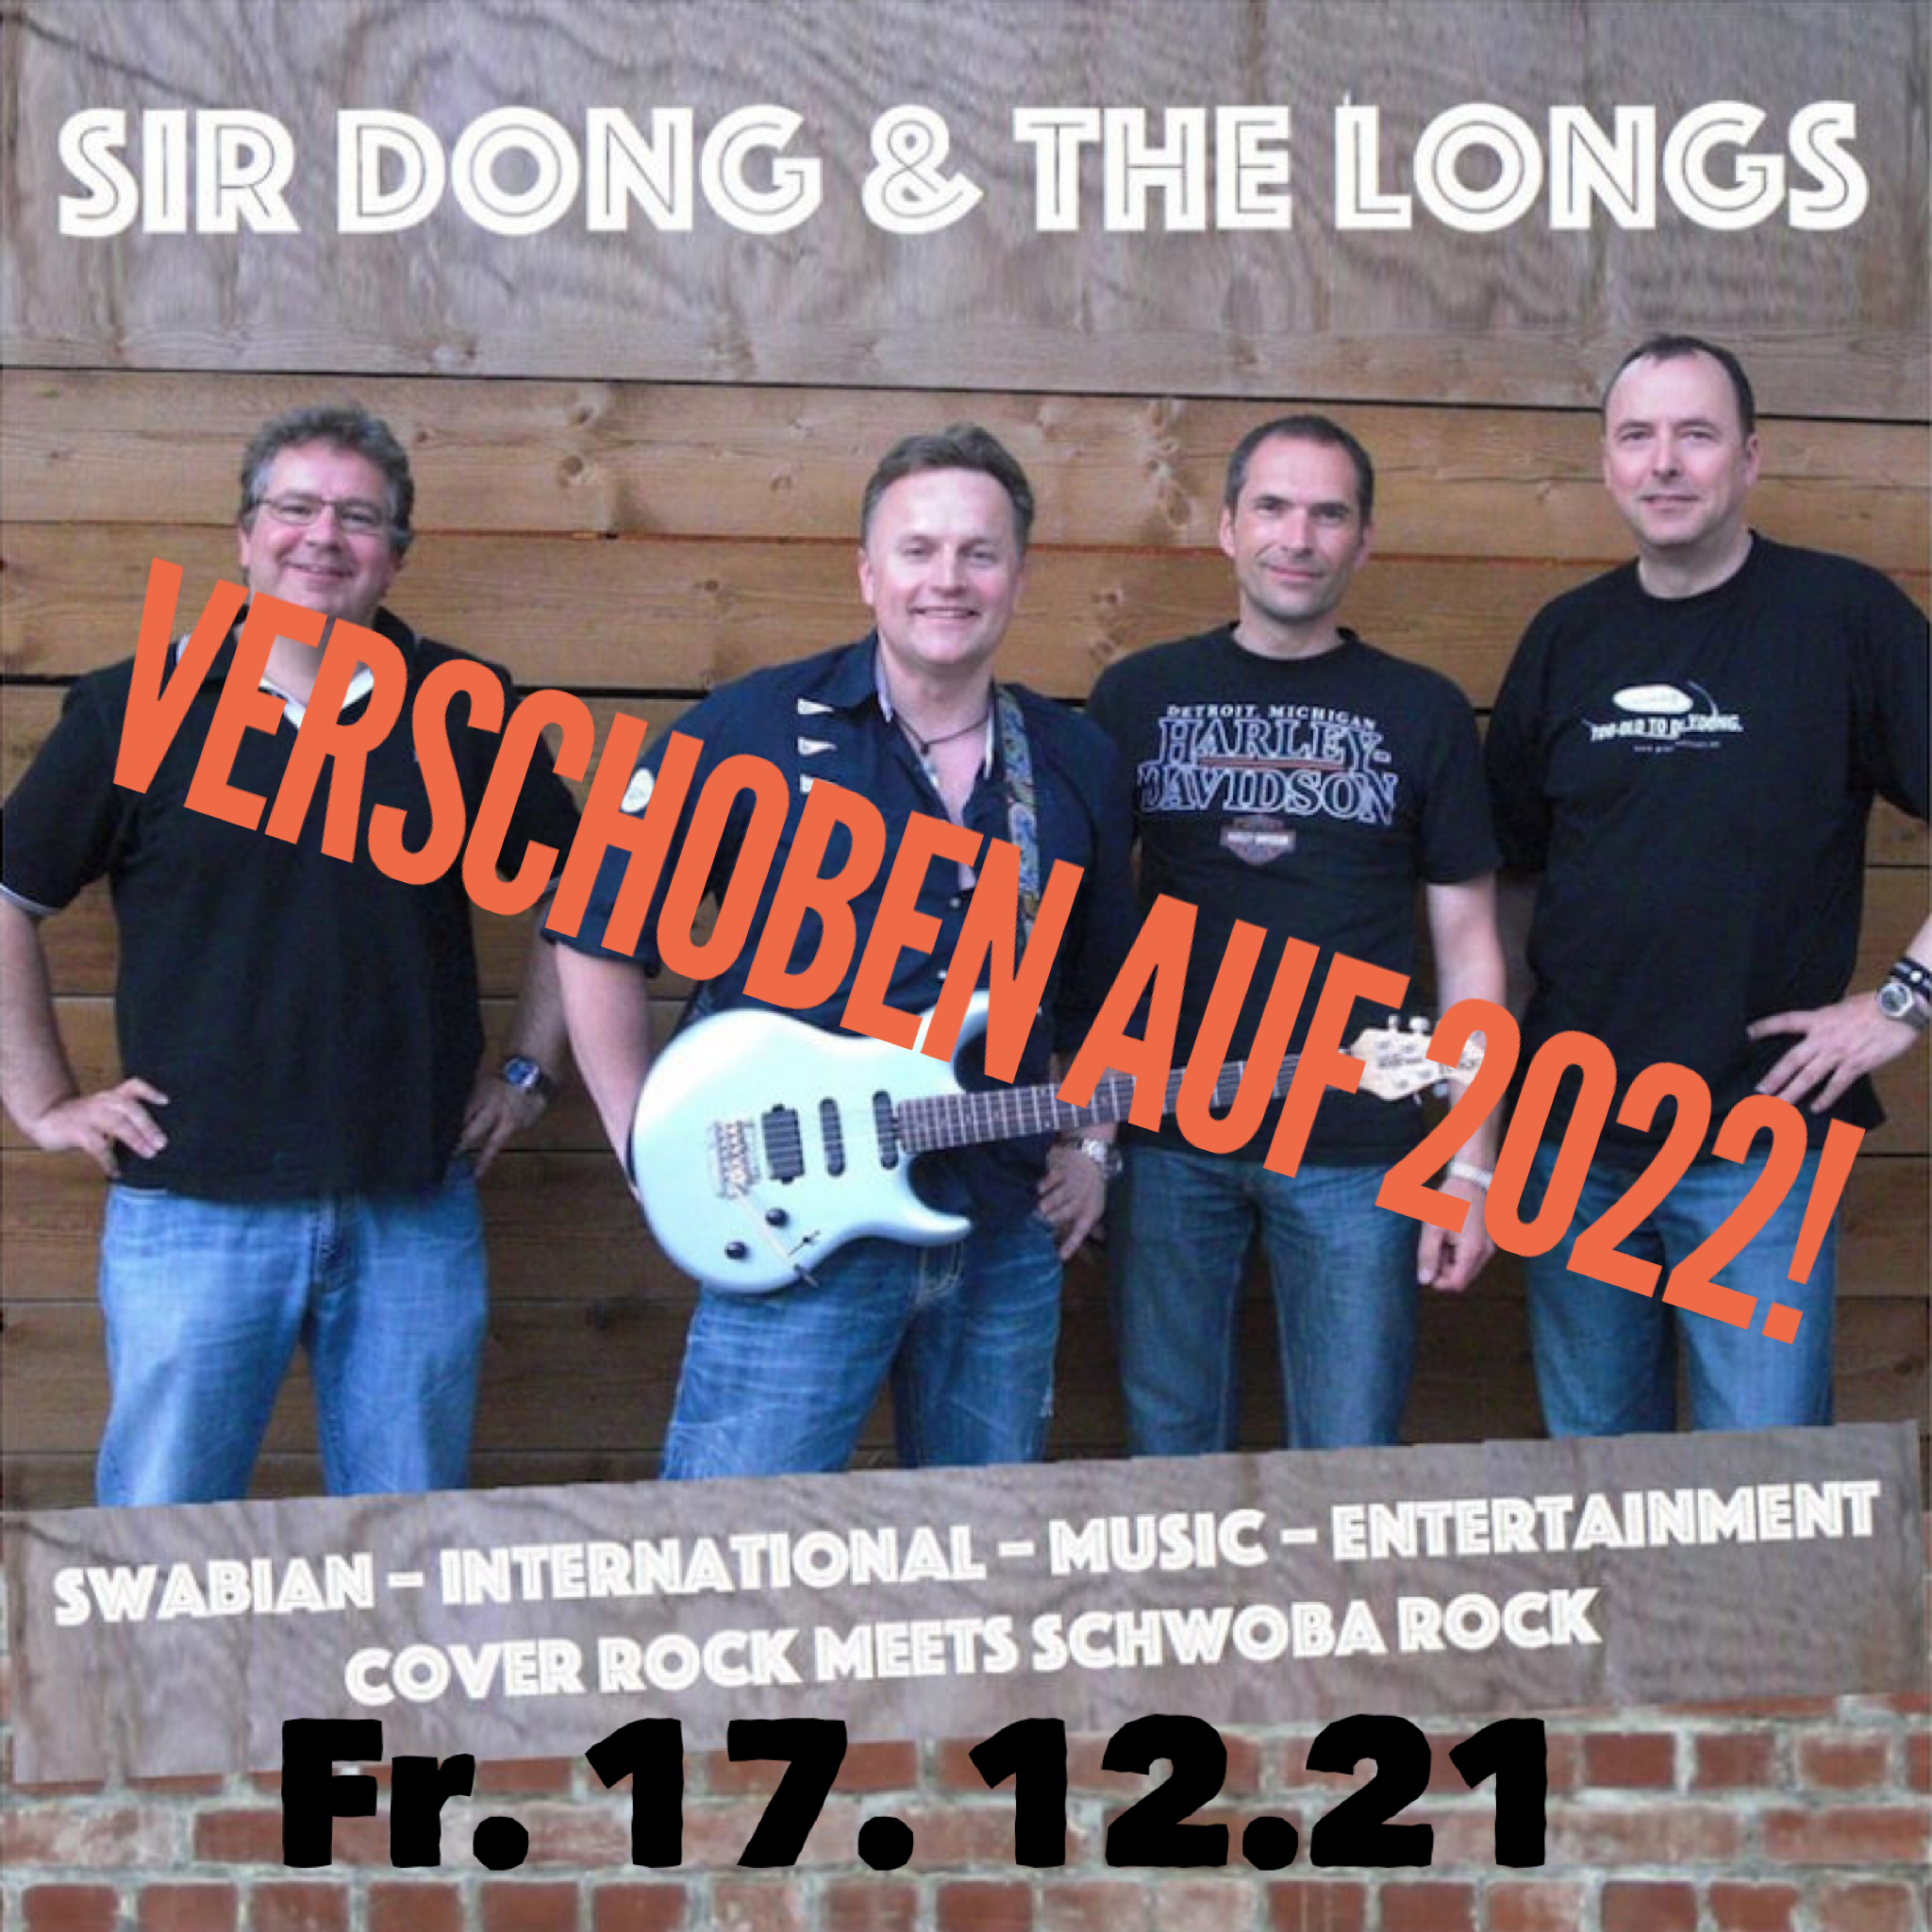 SIR DONG & the LONGS - Weihnachtsspecial - abgesagt!